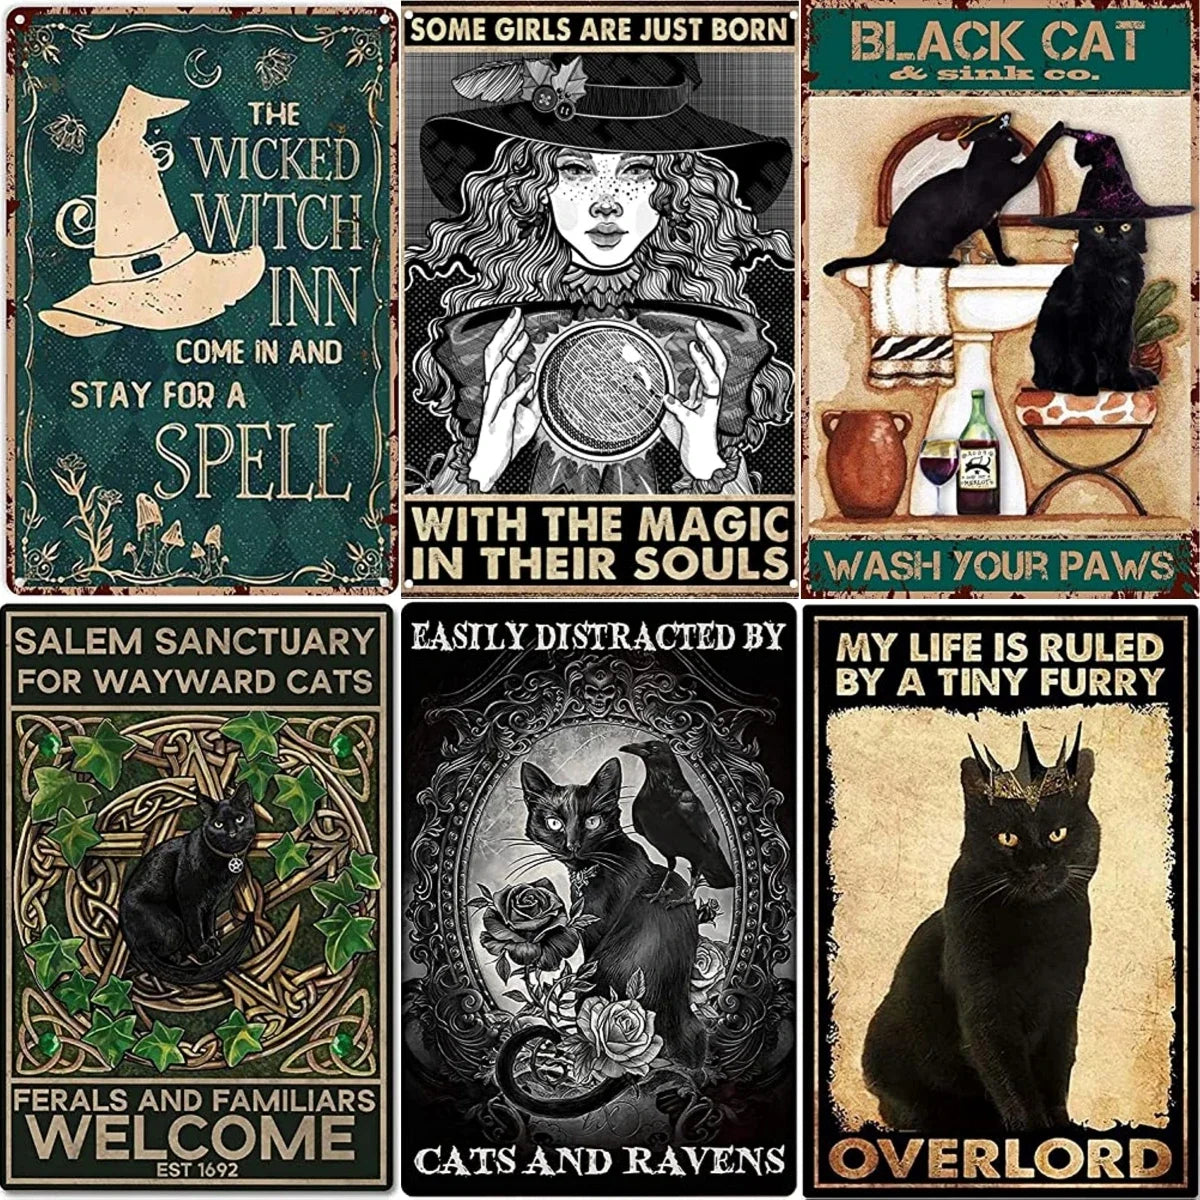 Vintage Witch Woman Black Art Poster - Halloween Black Cat Metal Tin Sign for Home Decor